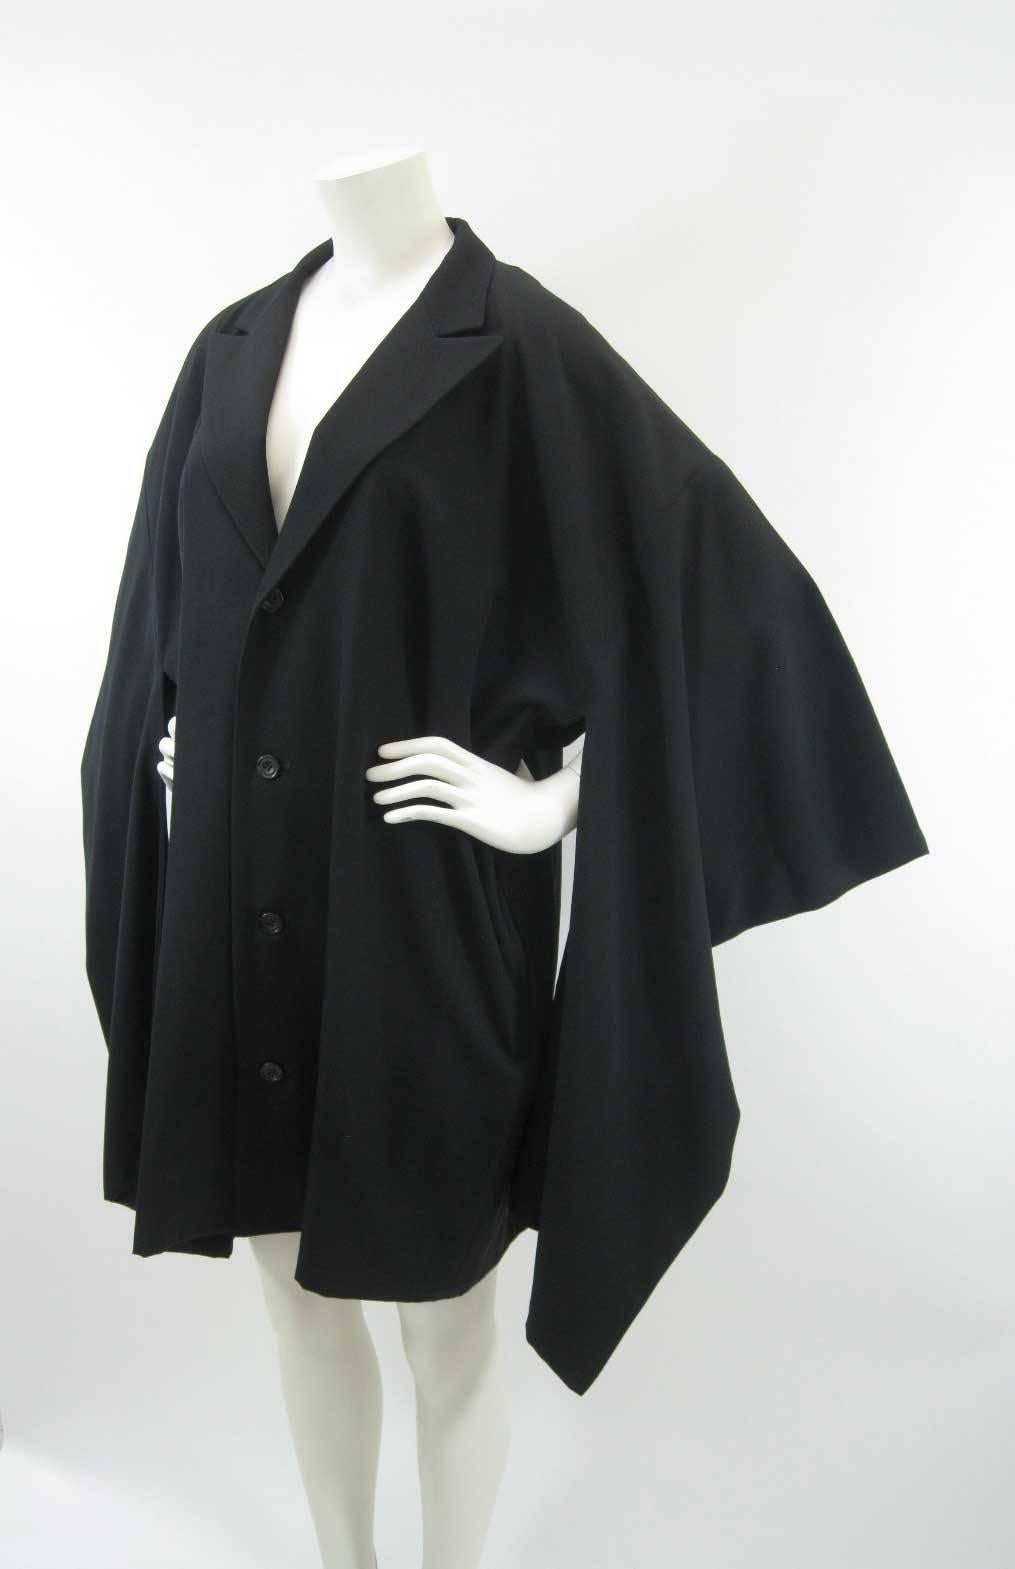 Black Yohji Yamamoto Japanese traditional with a twist style coat.

Boxy shape with long columns that hang from sleeve.

Fold over collar.

Four button closure.

Unlined.

Tagged size M. (This item is listed as unisex however it is sized a men's